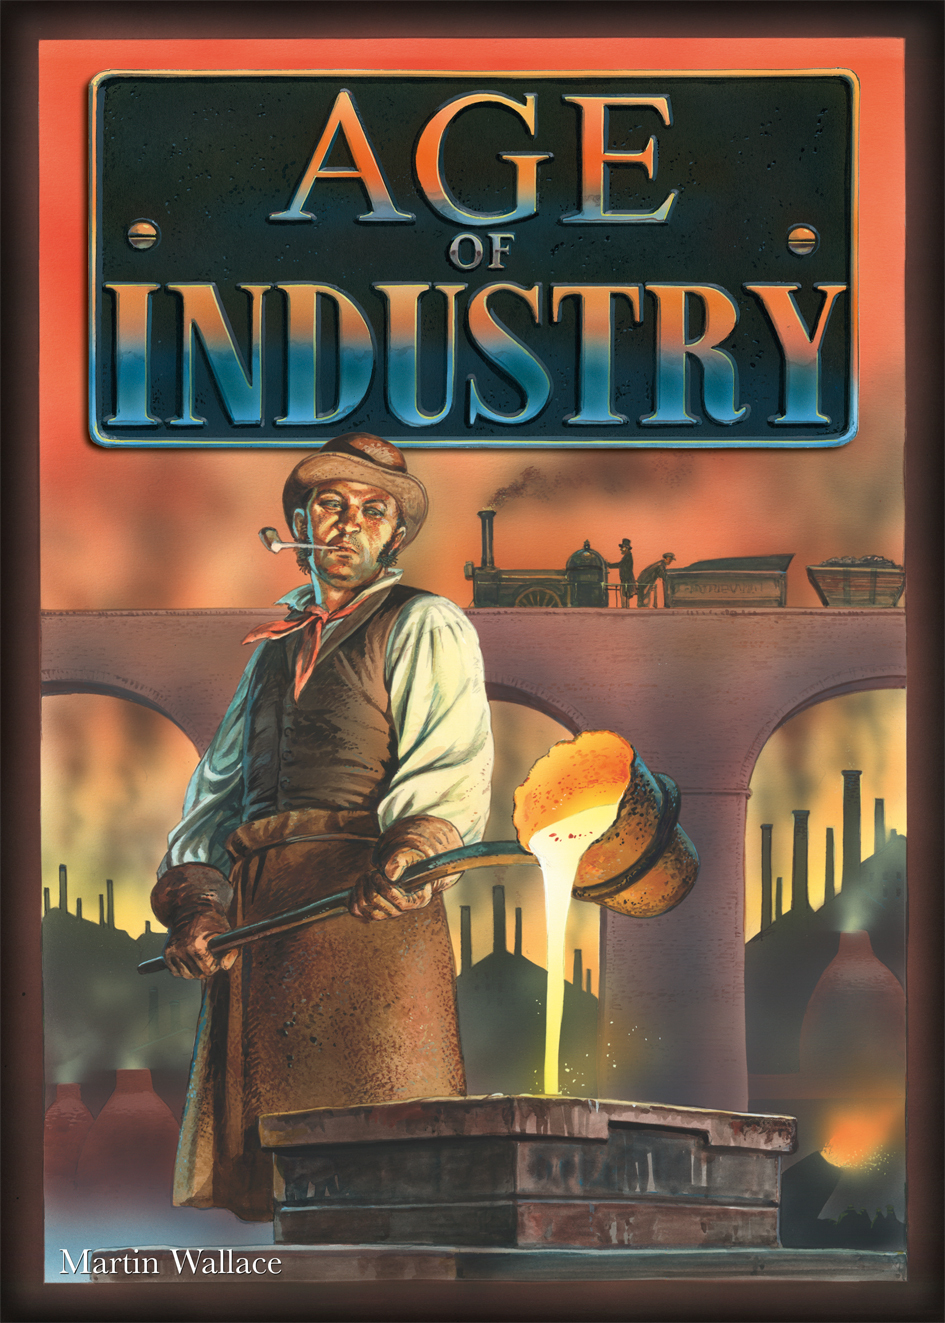 Age of Industry - The spread of the Industrial Revolution